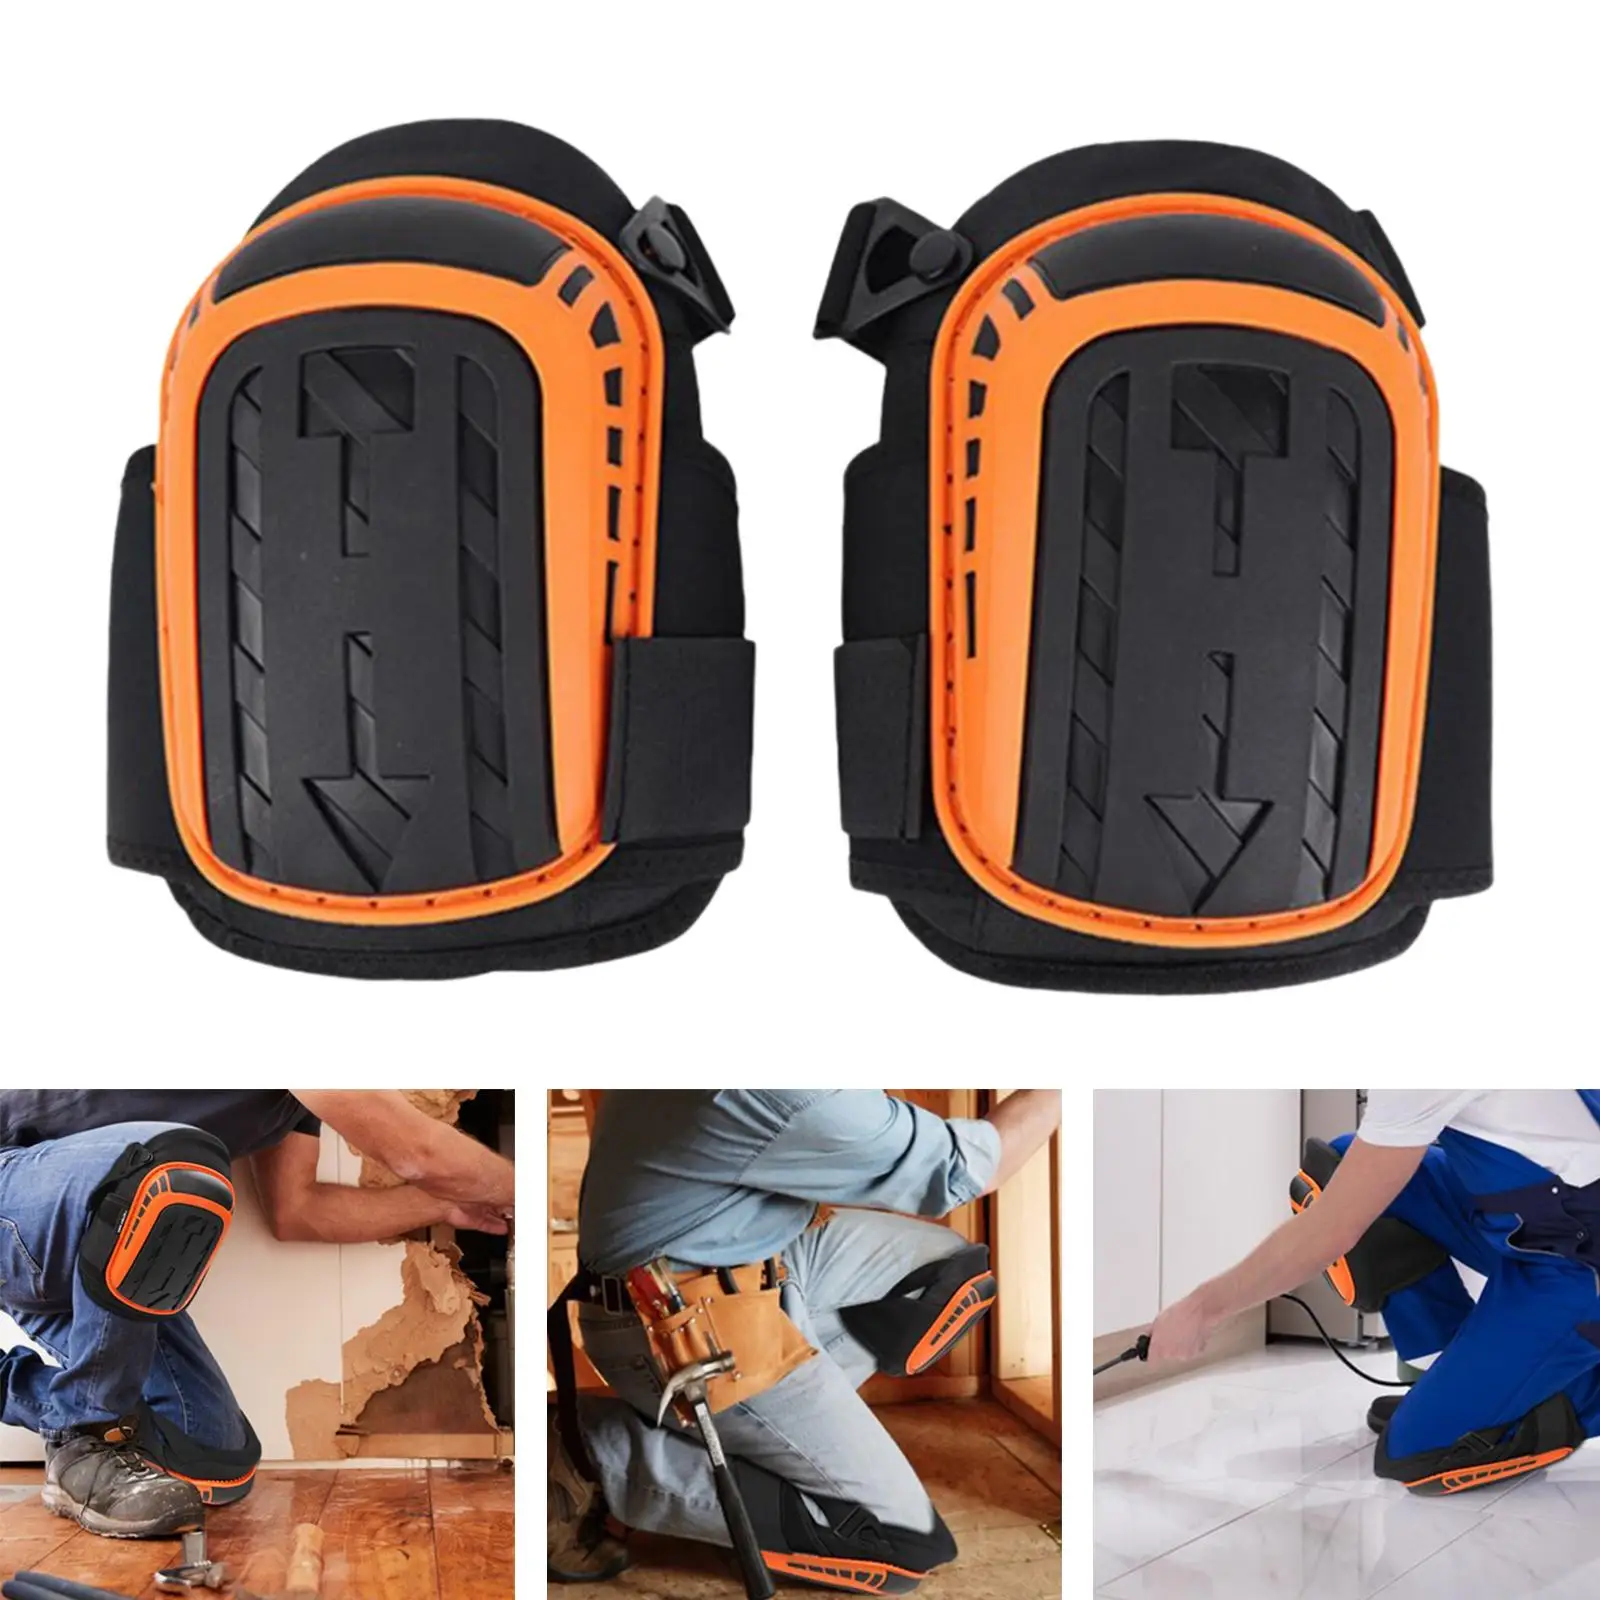 2 Pieces Knee Pads Safety Protective Gear Set for Scooter Safety